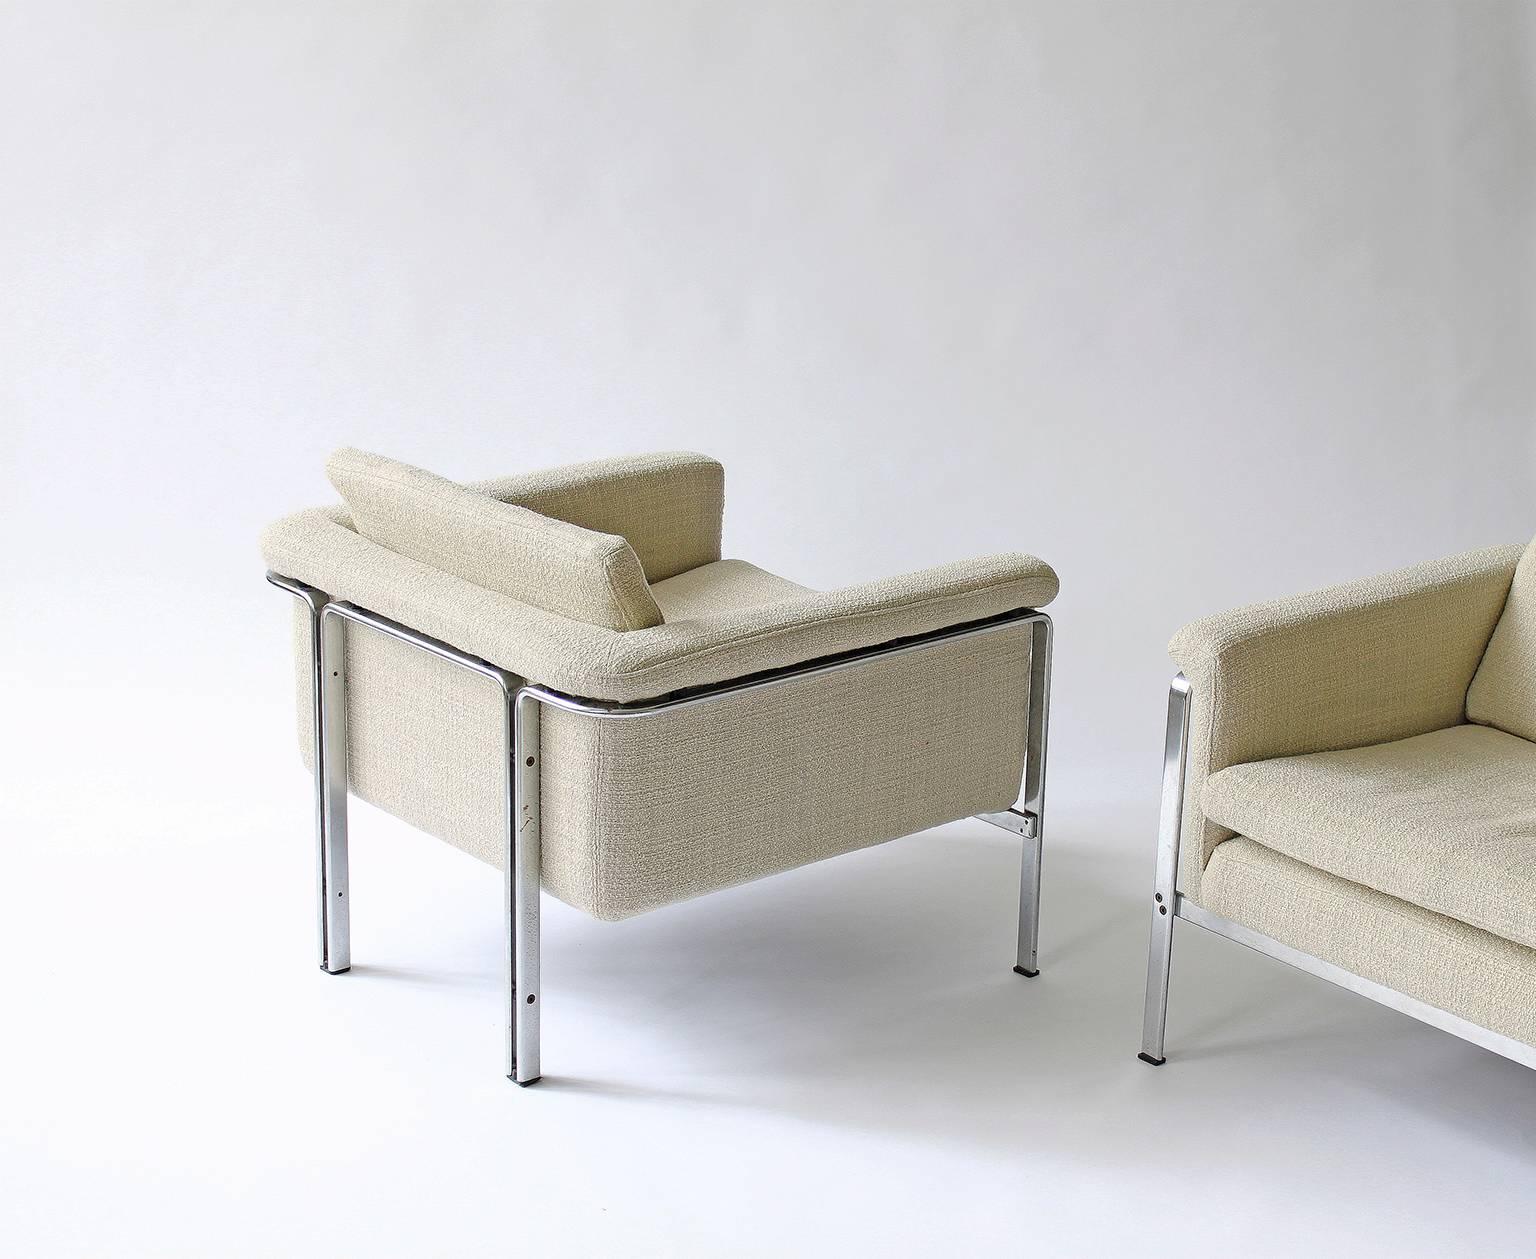 A pair of deep club chairs designed by Horst Brüning. Manufactured in Germany by Kill International. Chromed steel frame in a strong geometric shape supporting an upholstered monocoque. New wool fabric. Chrome shows marks of age and use.